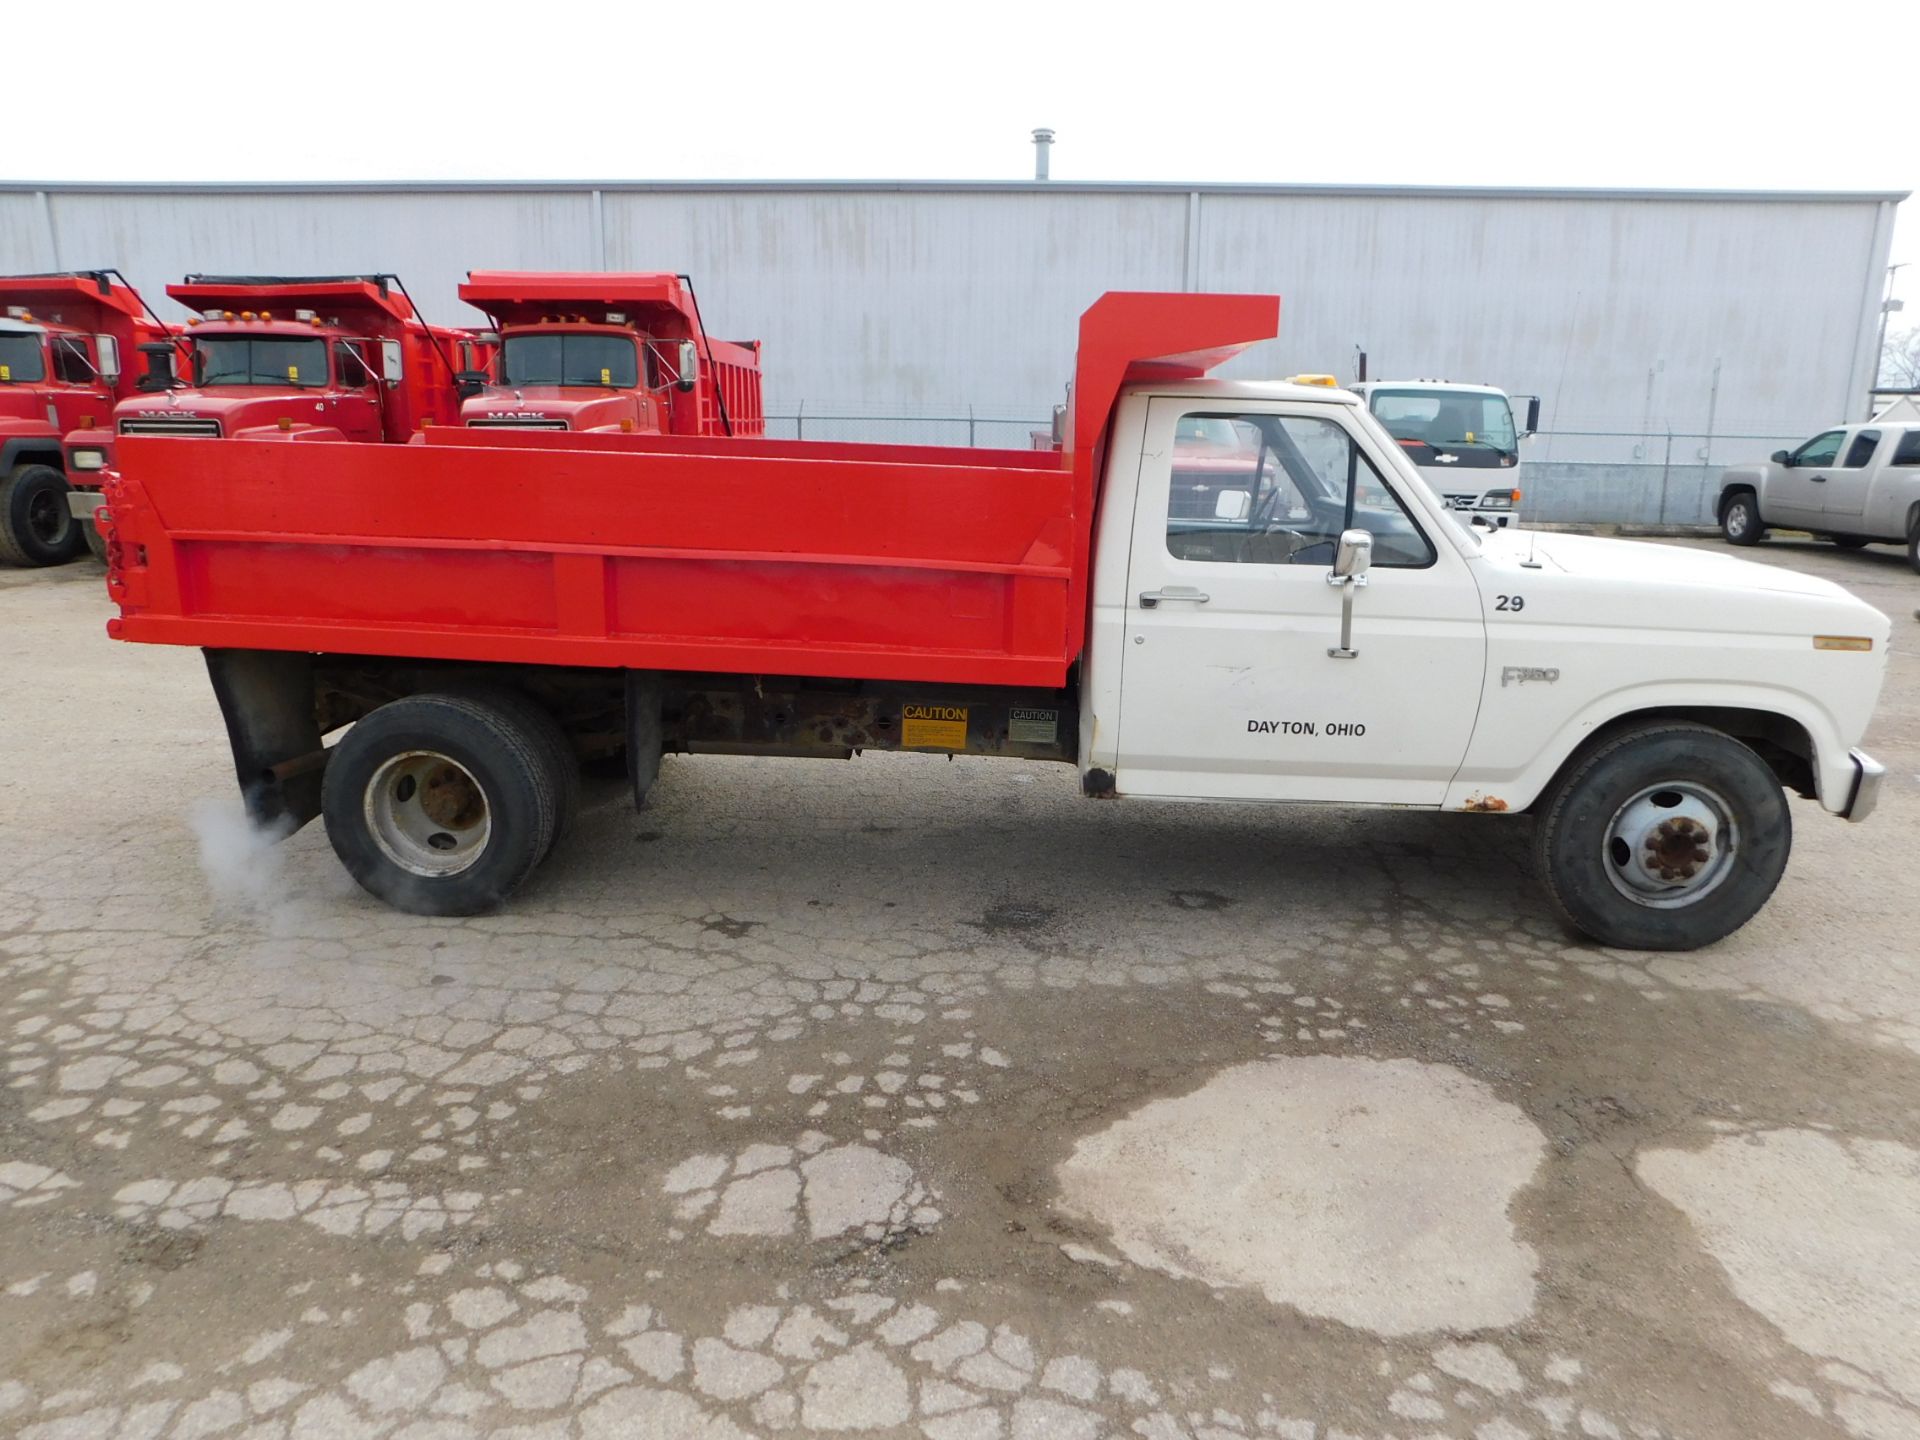 1986 Ford F-350 Single Axle Dump, Gas, 4-Speed Manual Transmission, PTO, 10' Steel Dump Bed, 81, - Image 4 of 18